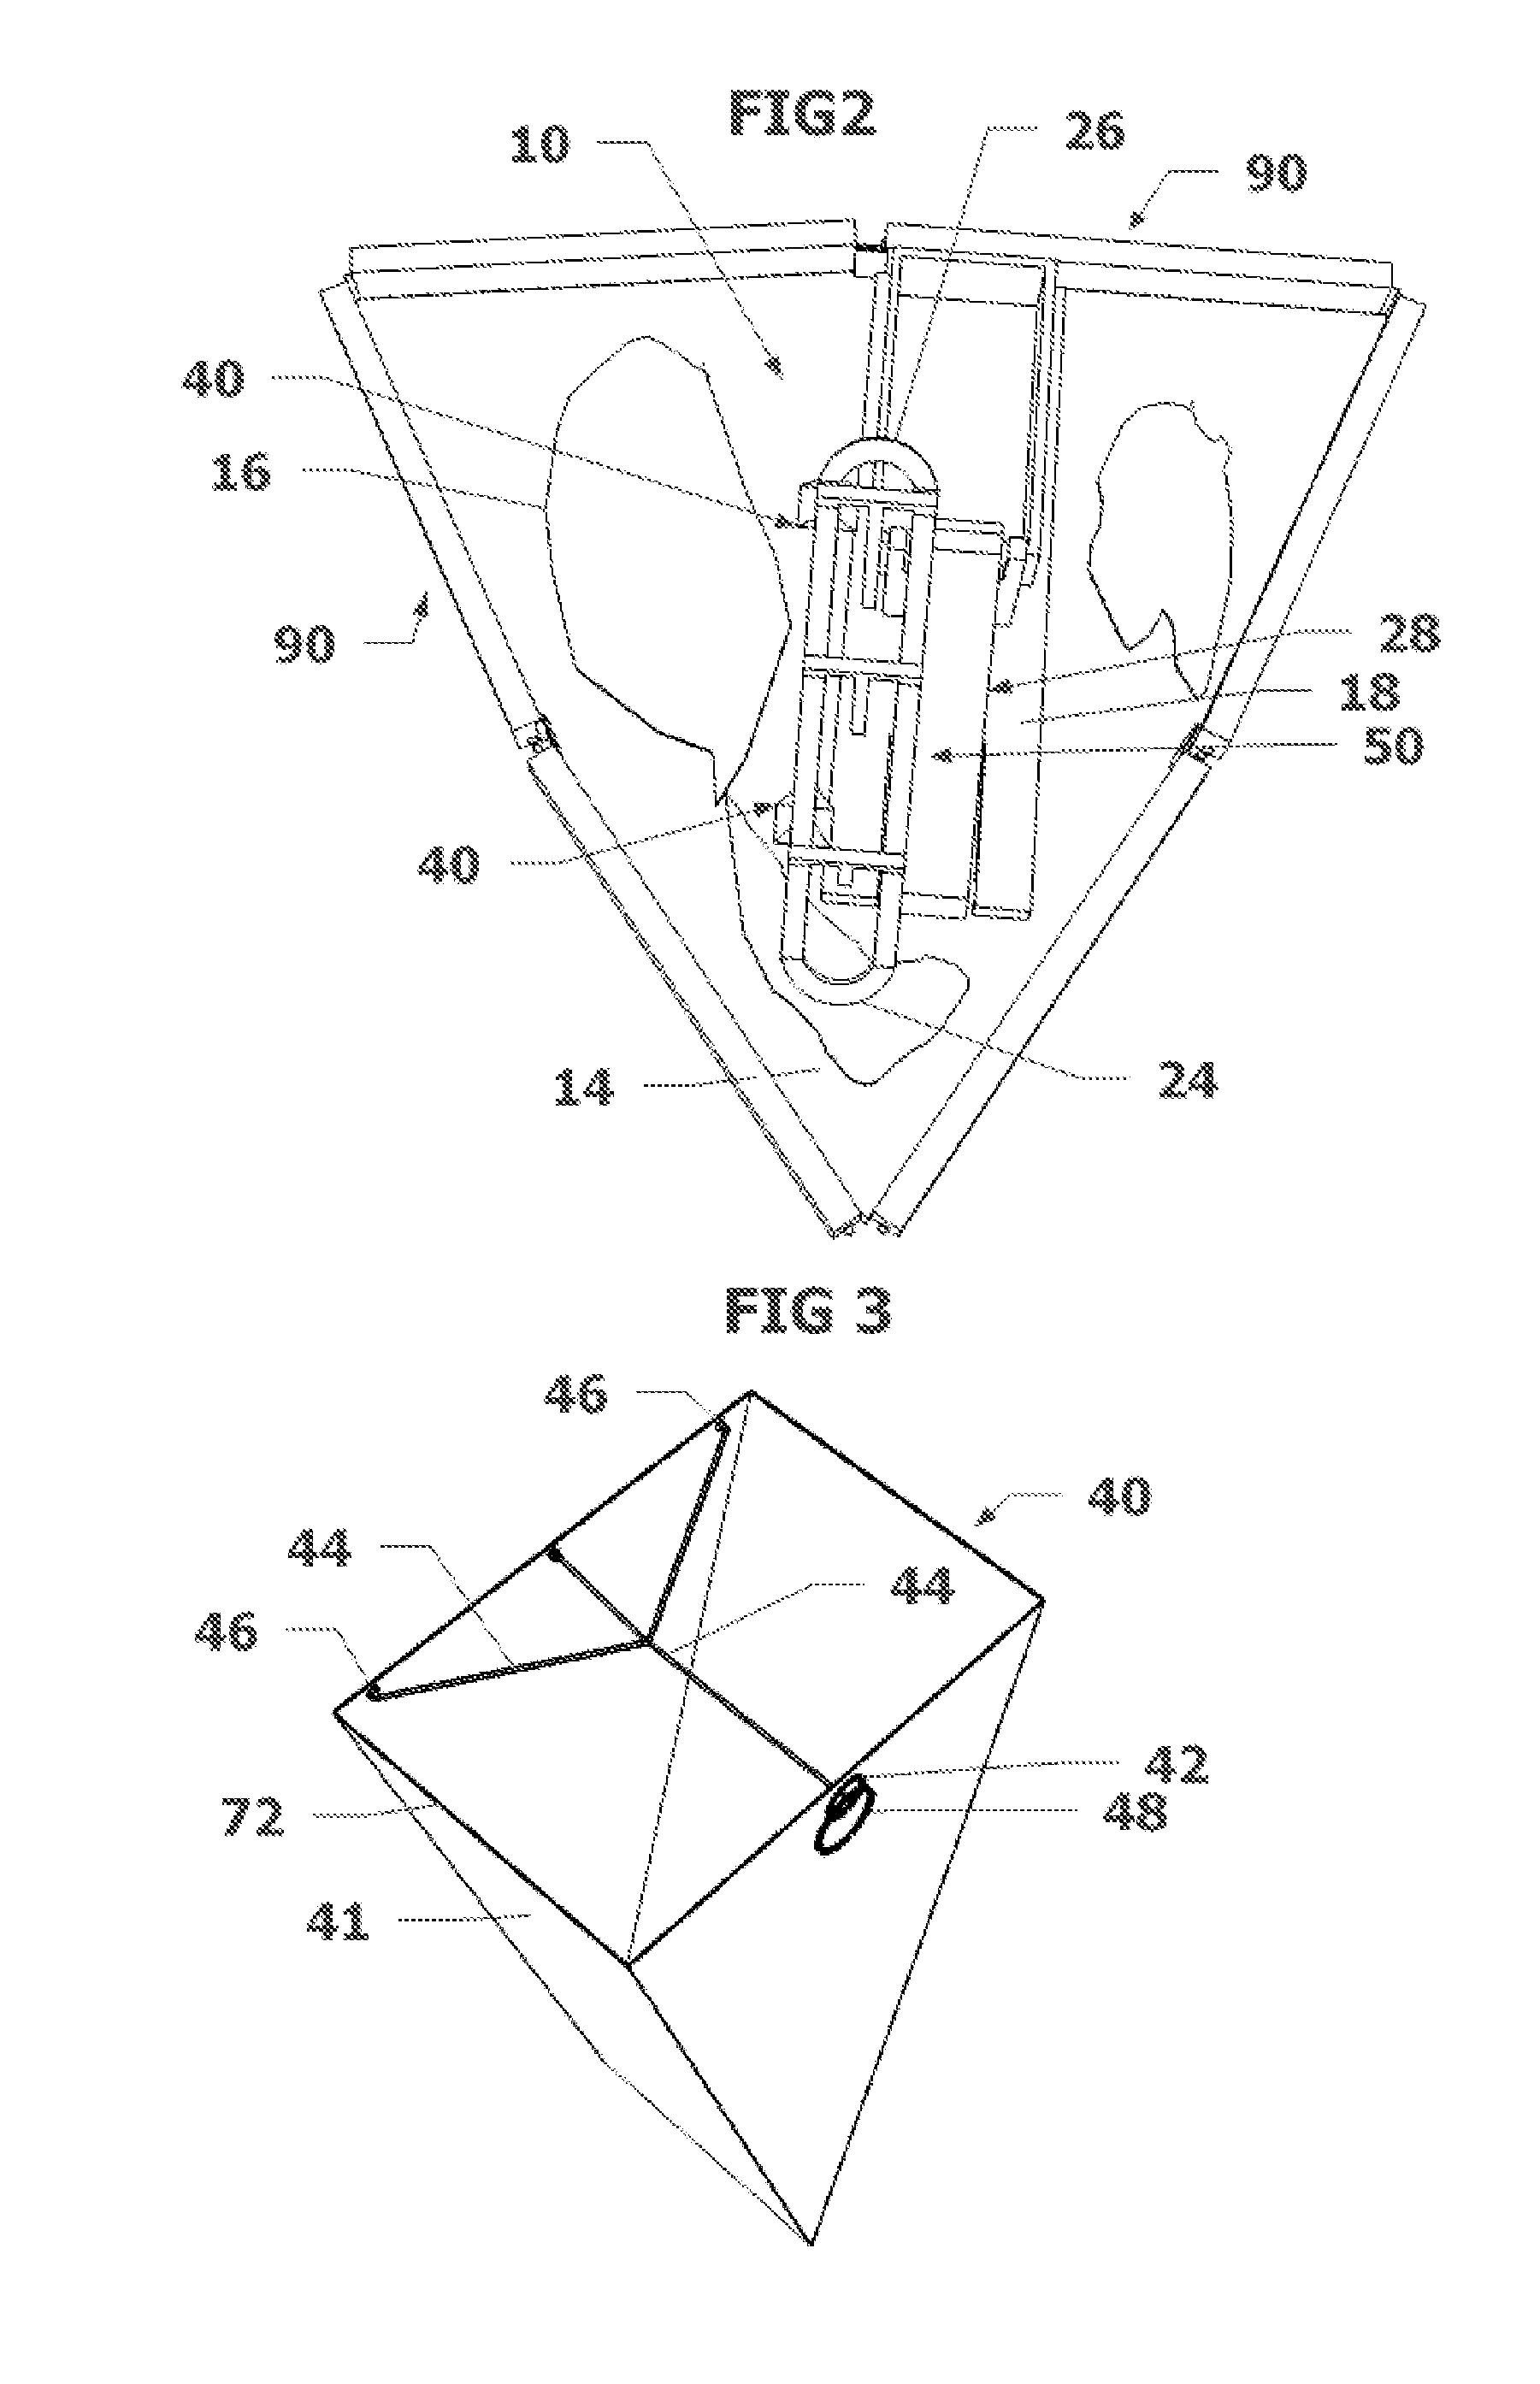 Apparatus for recovering oil from a body of water